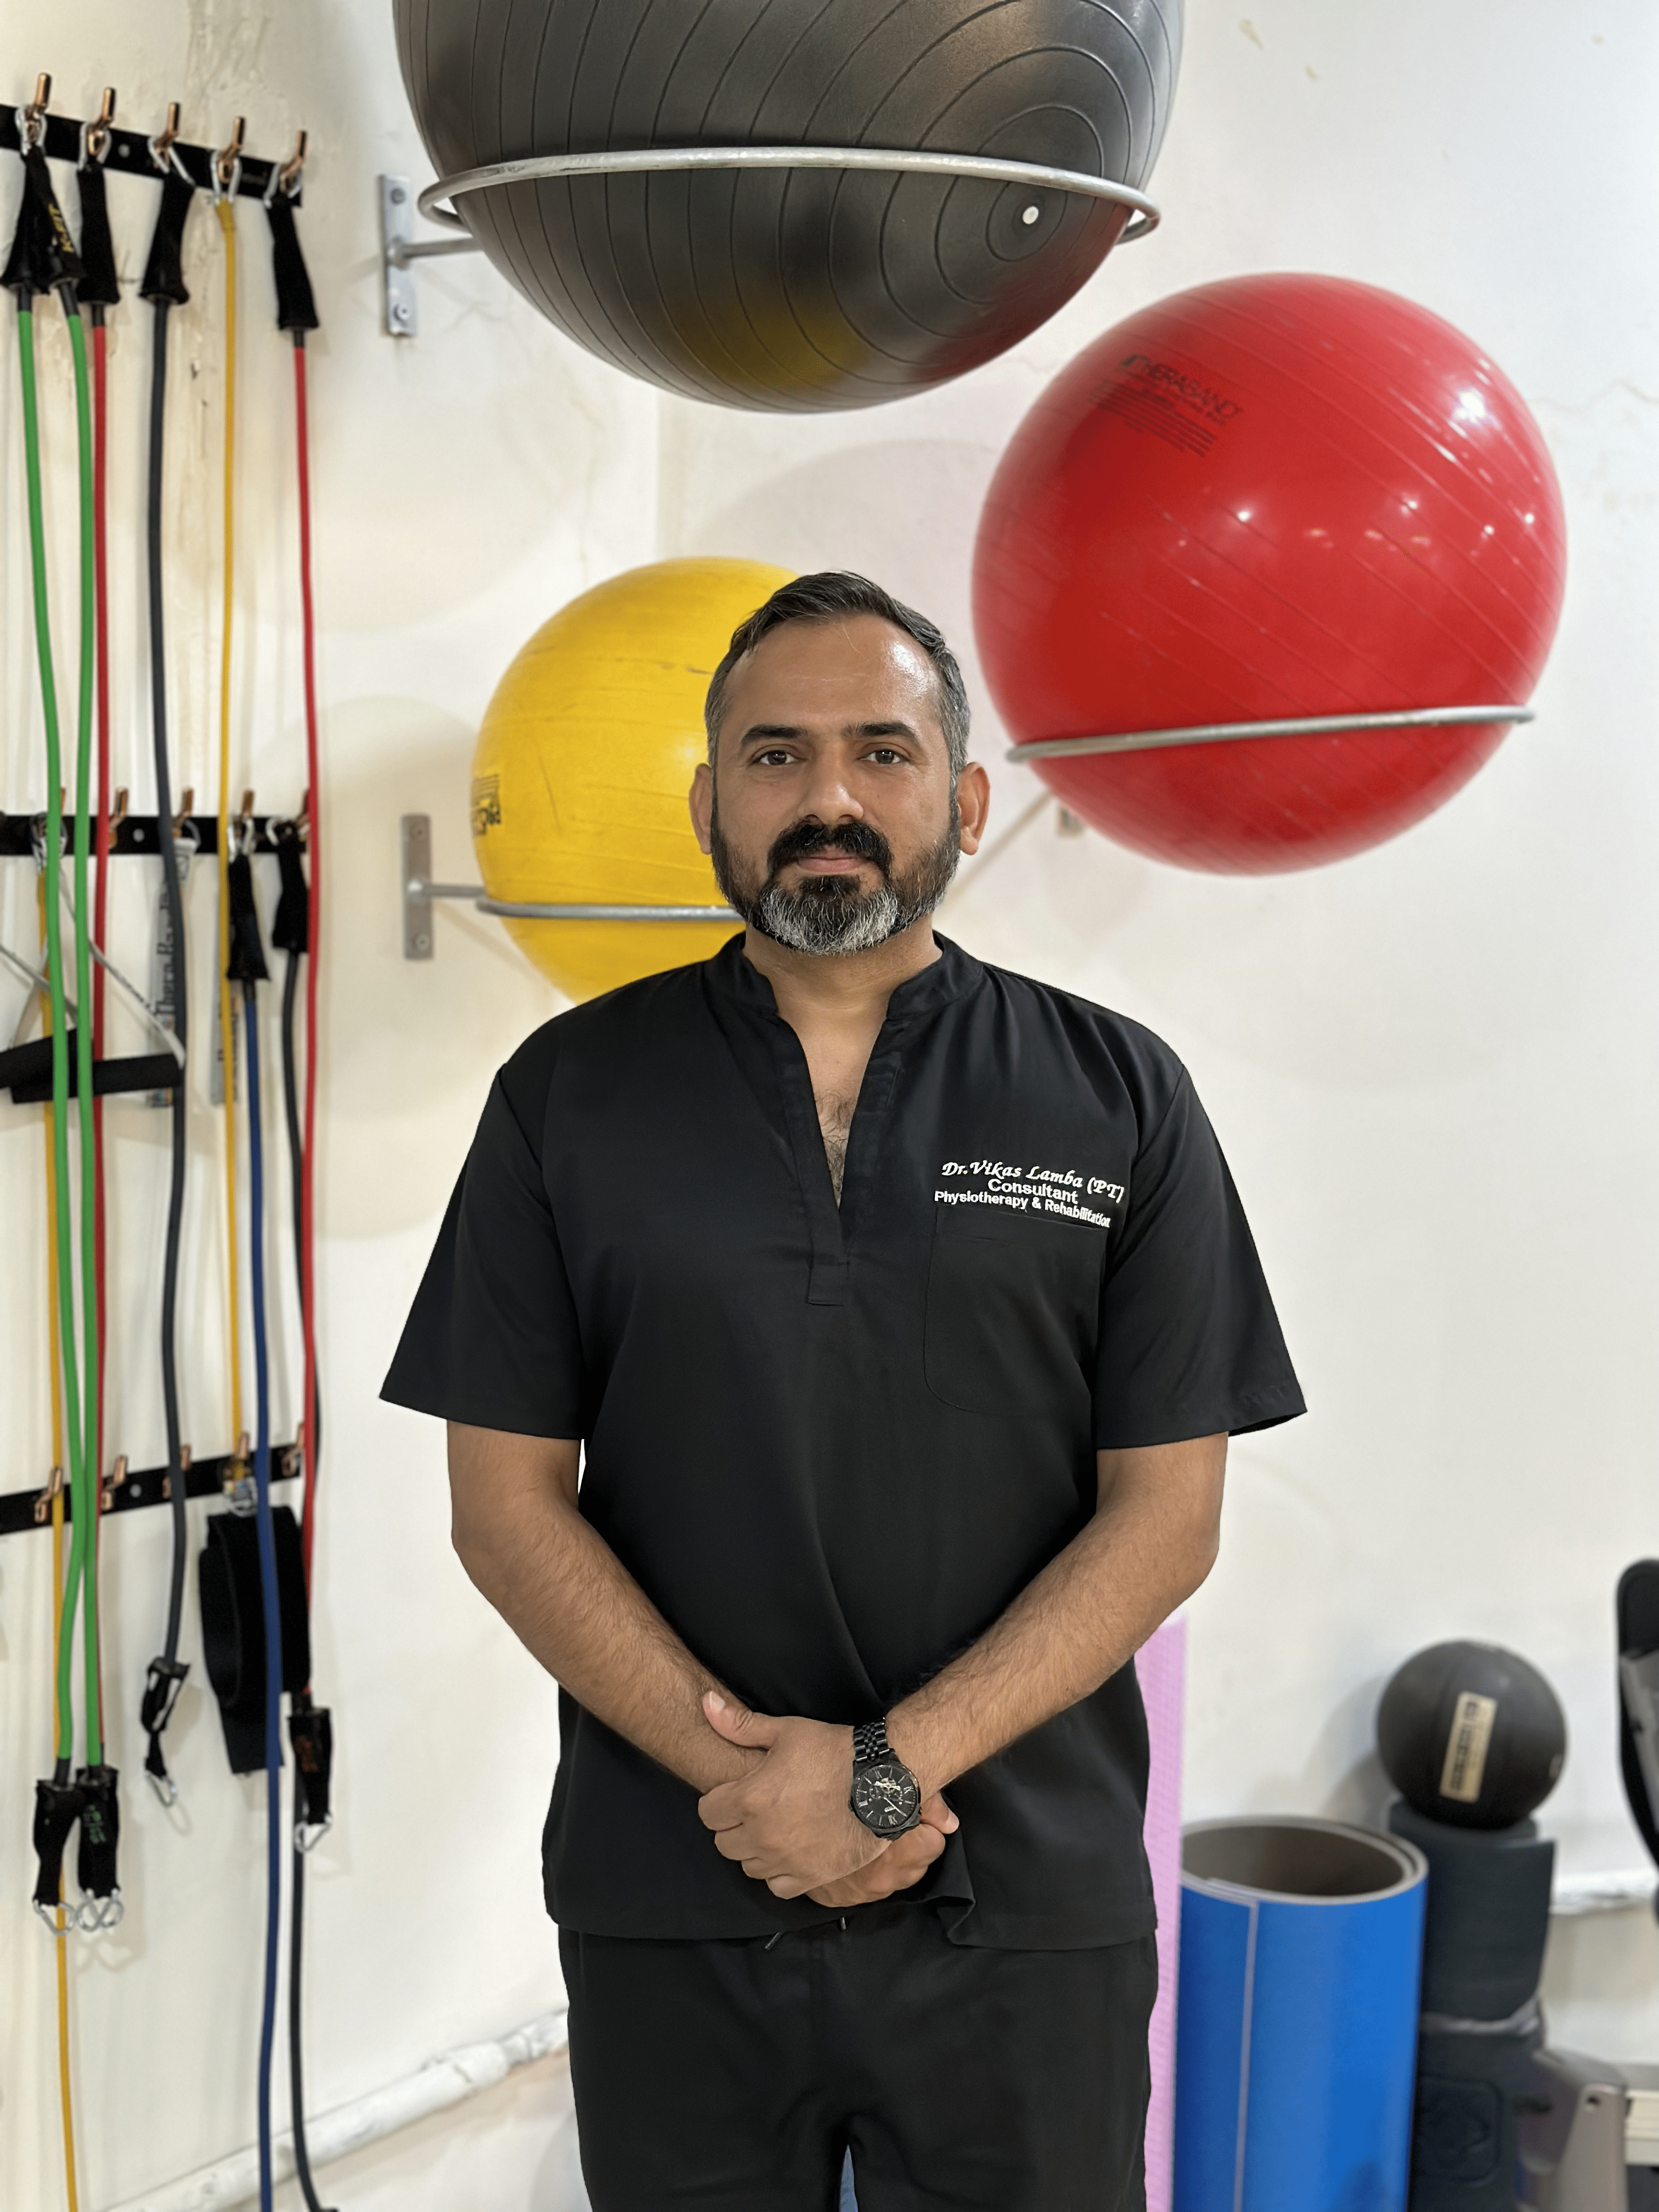 Post-Operative Rehabilitation – Quest Sports & Physiotherapy